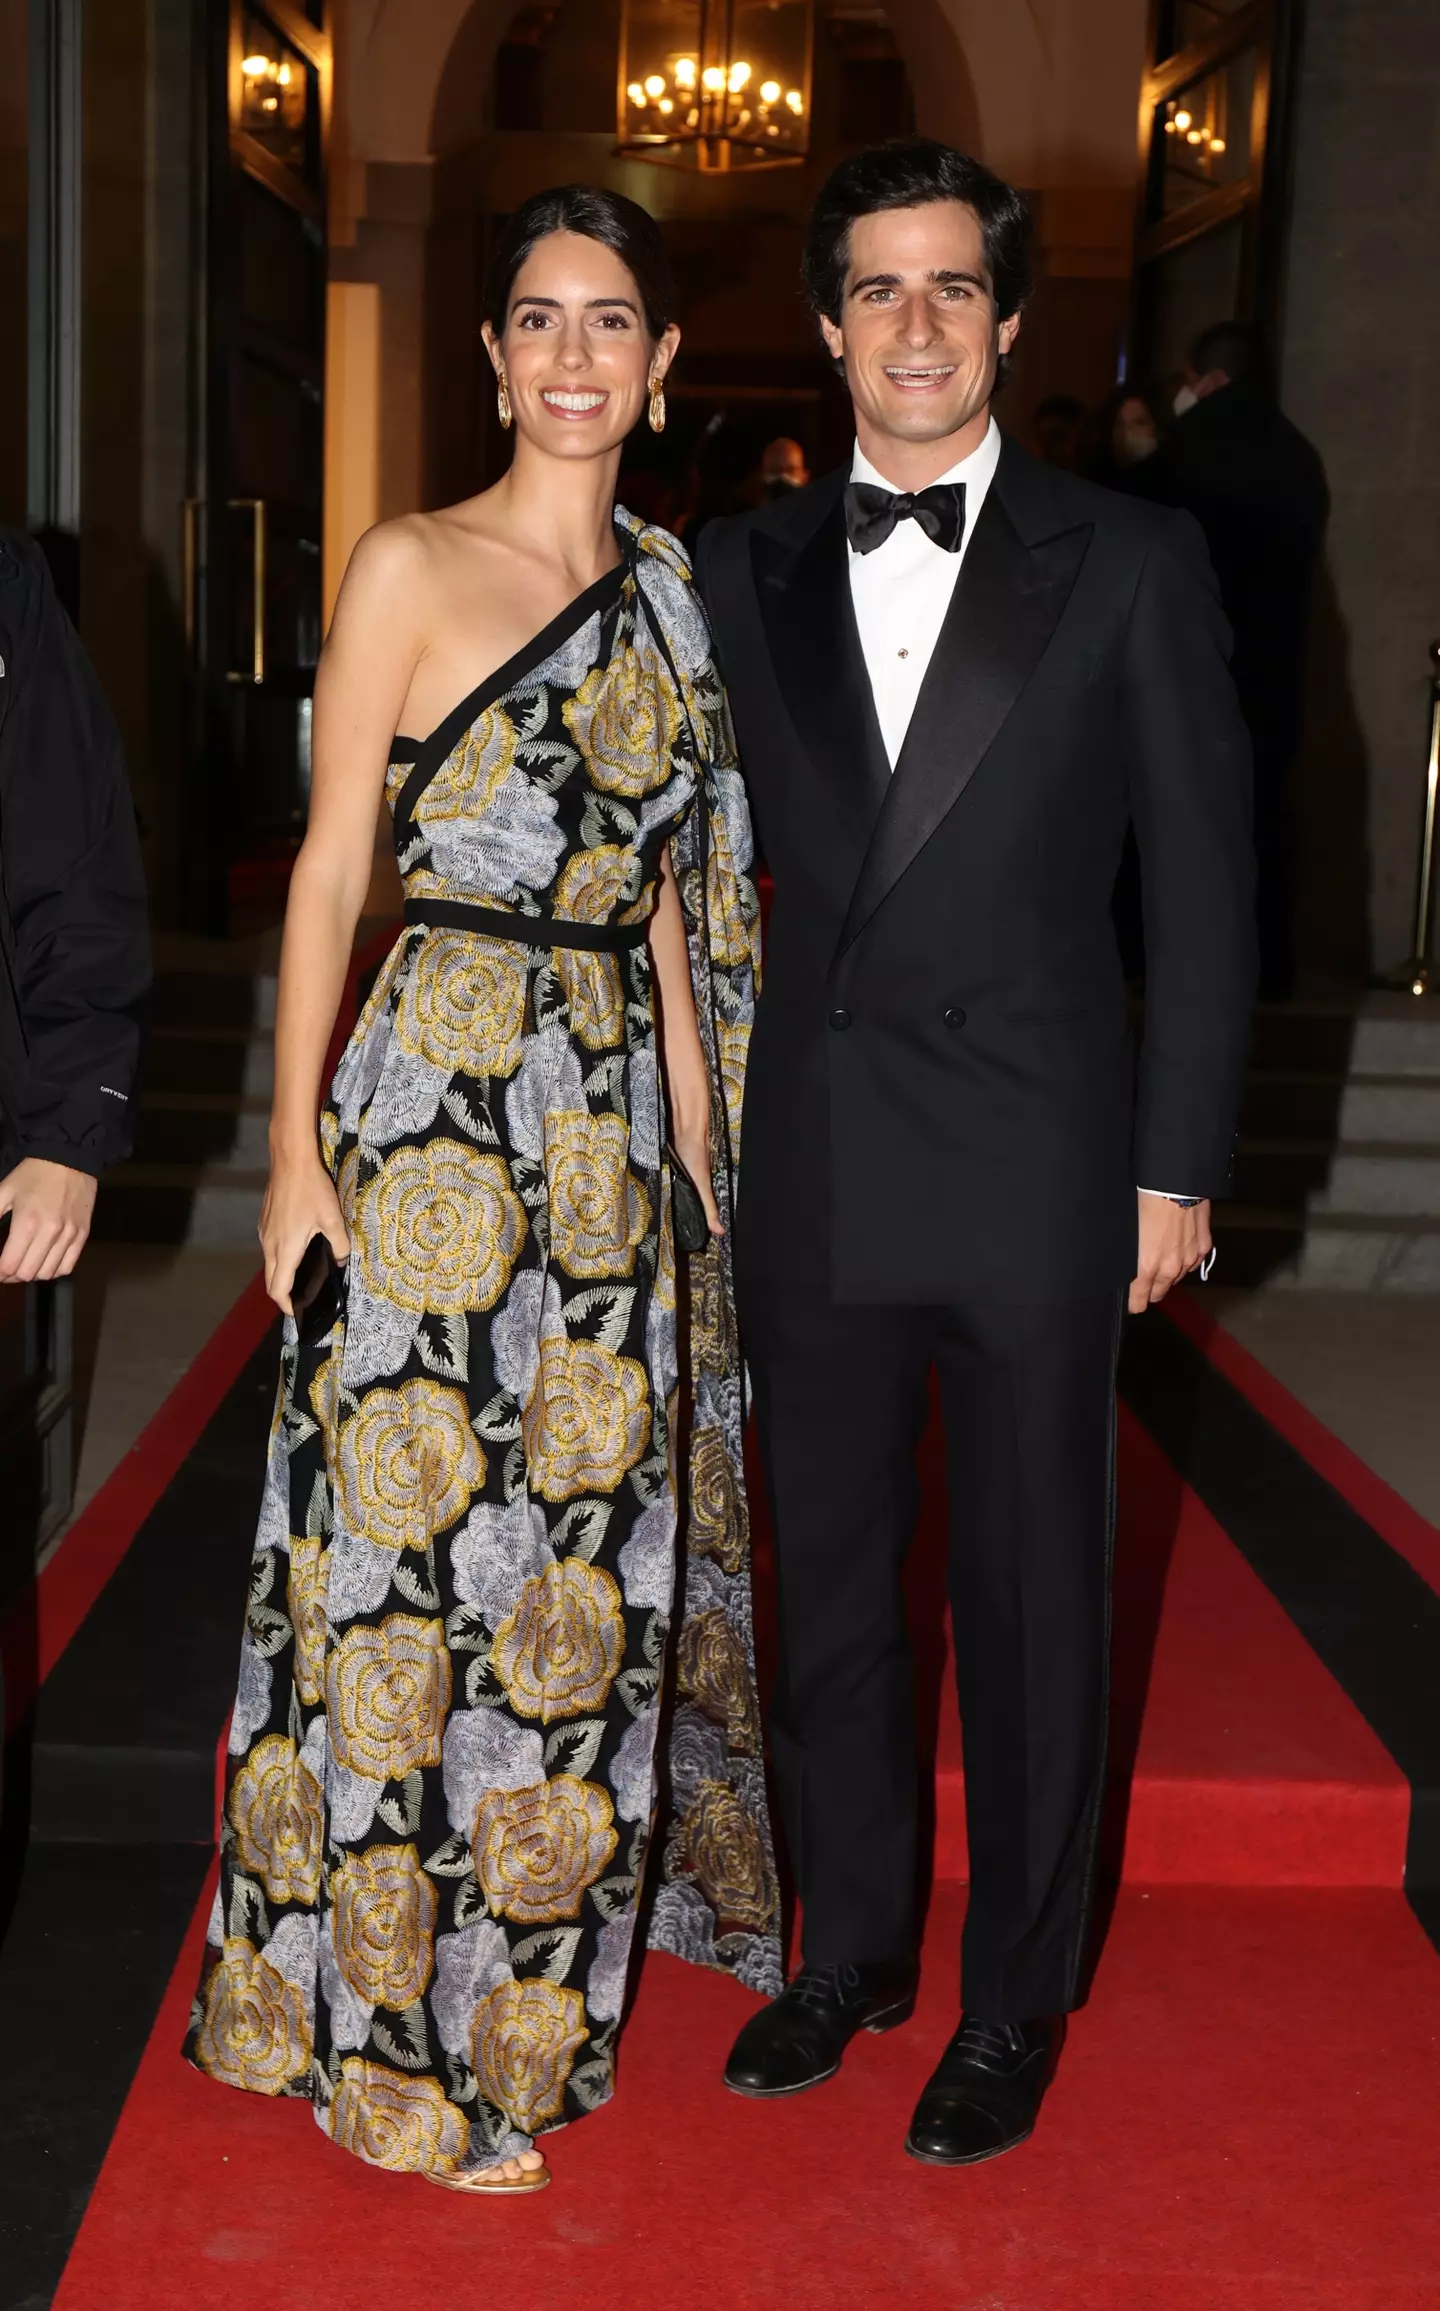 The Duke and Duchess of Huéscar wed in 2018.